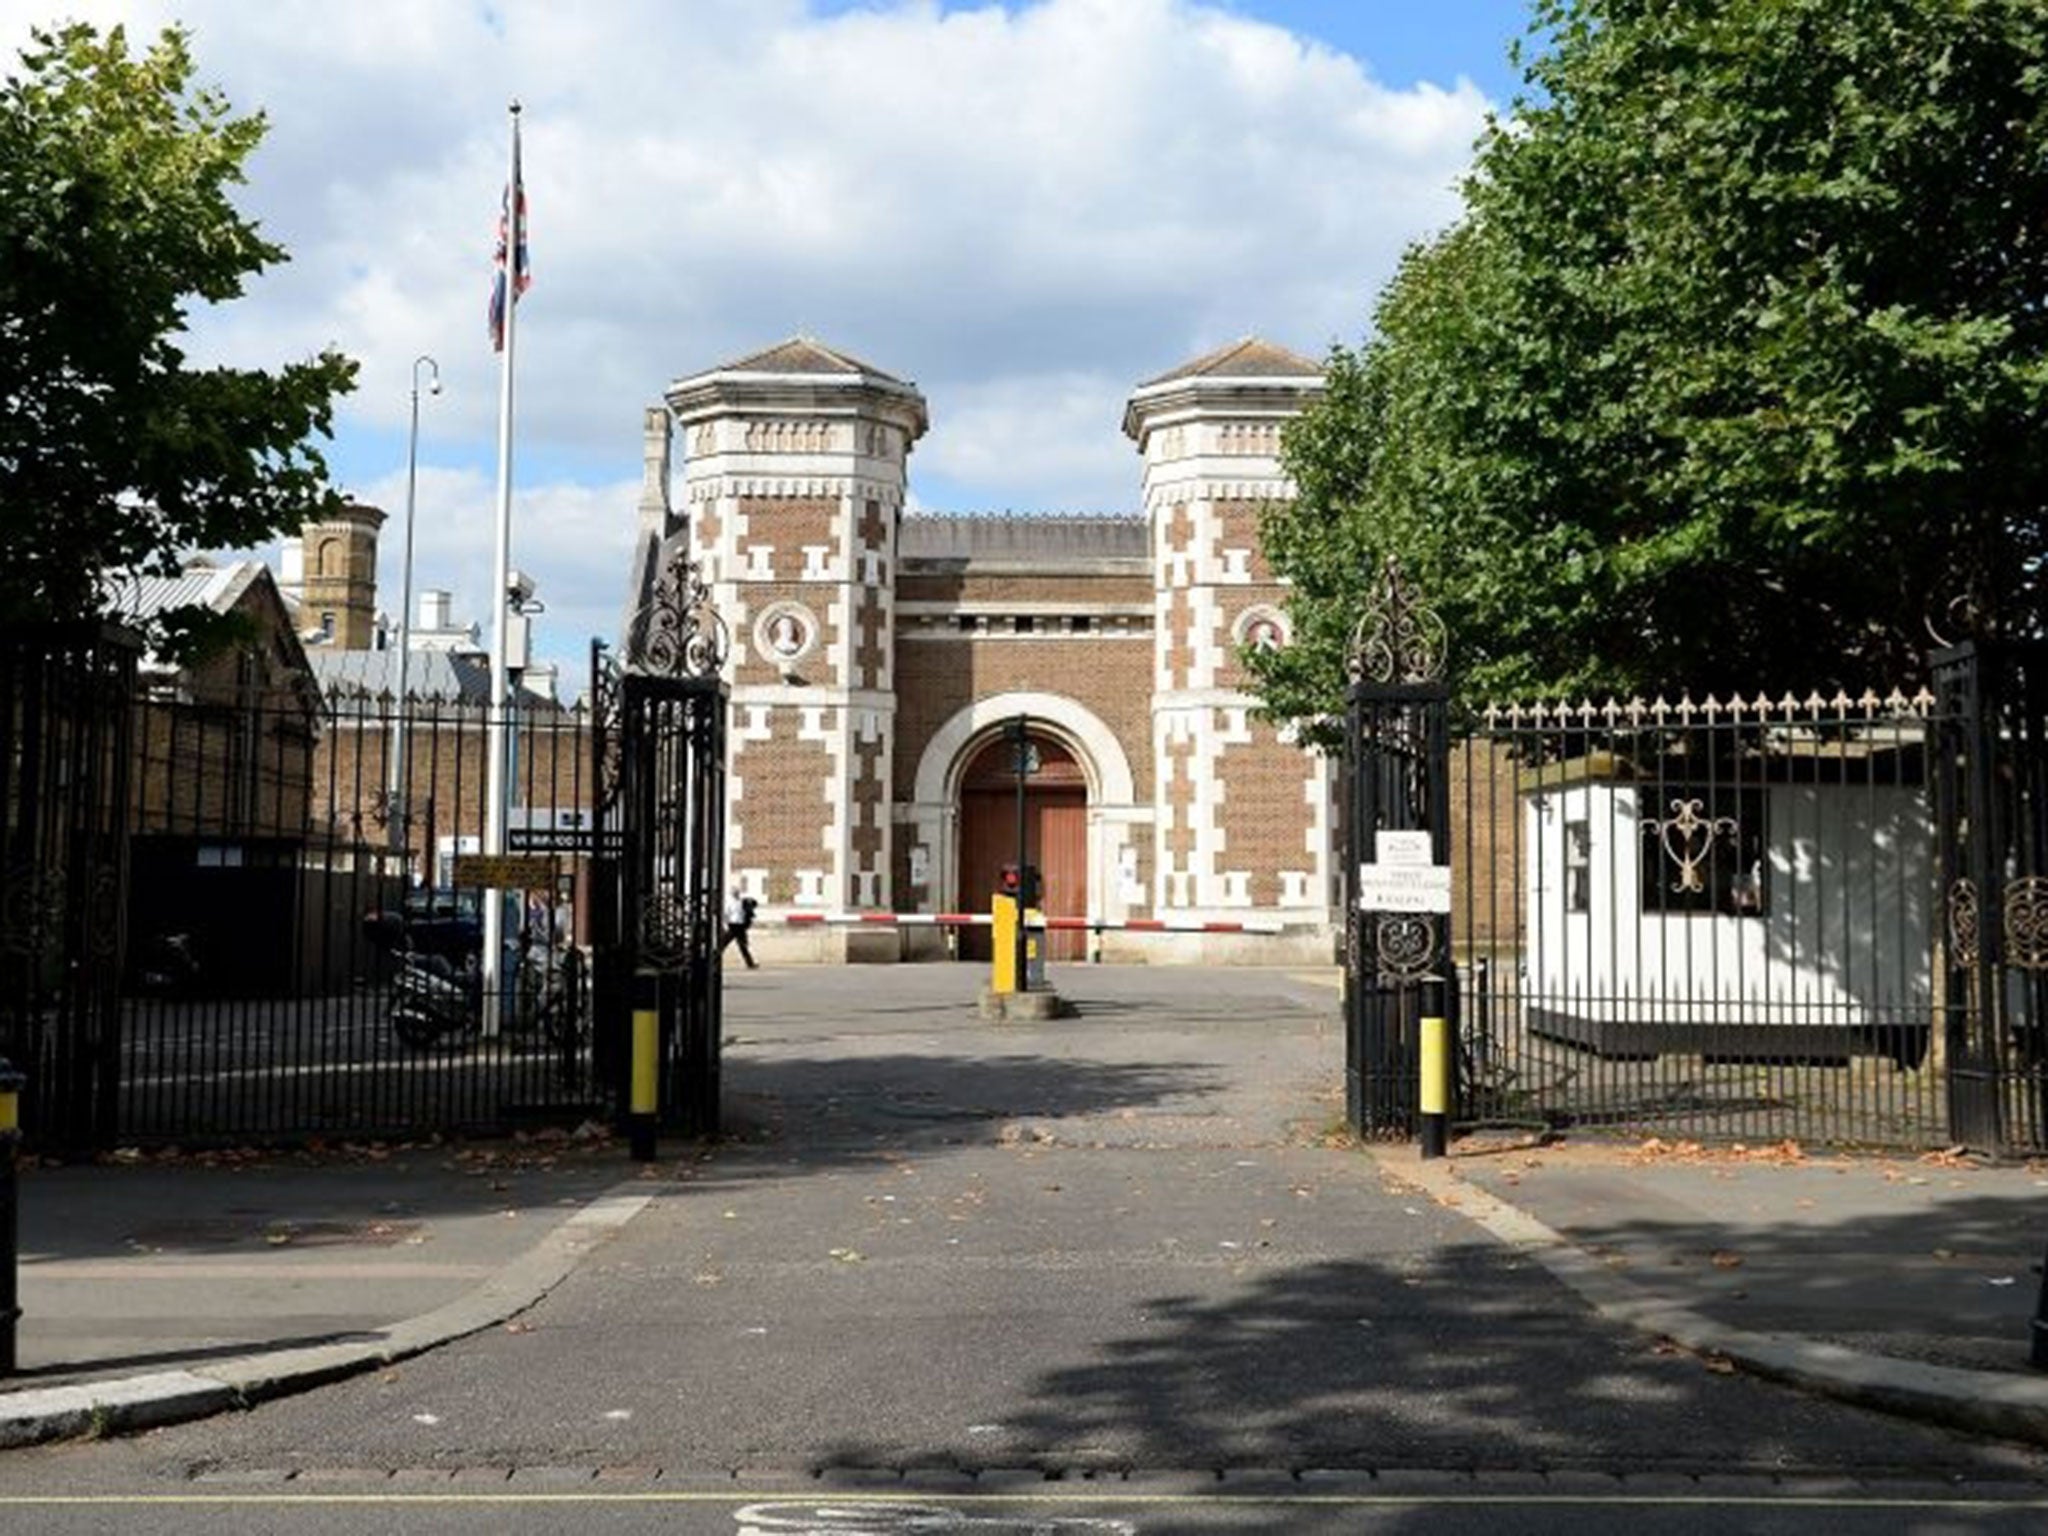 There are concerns over chronic staff shortages at the prison